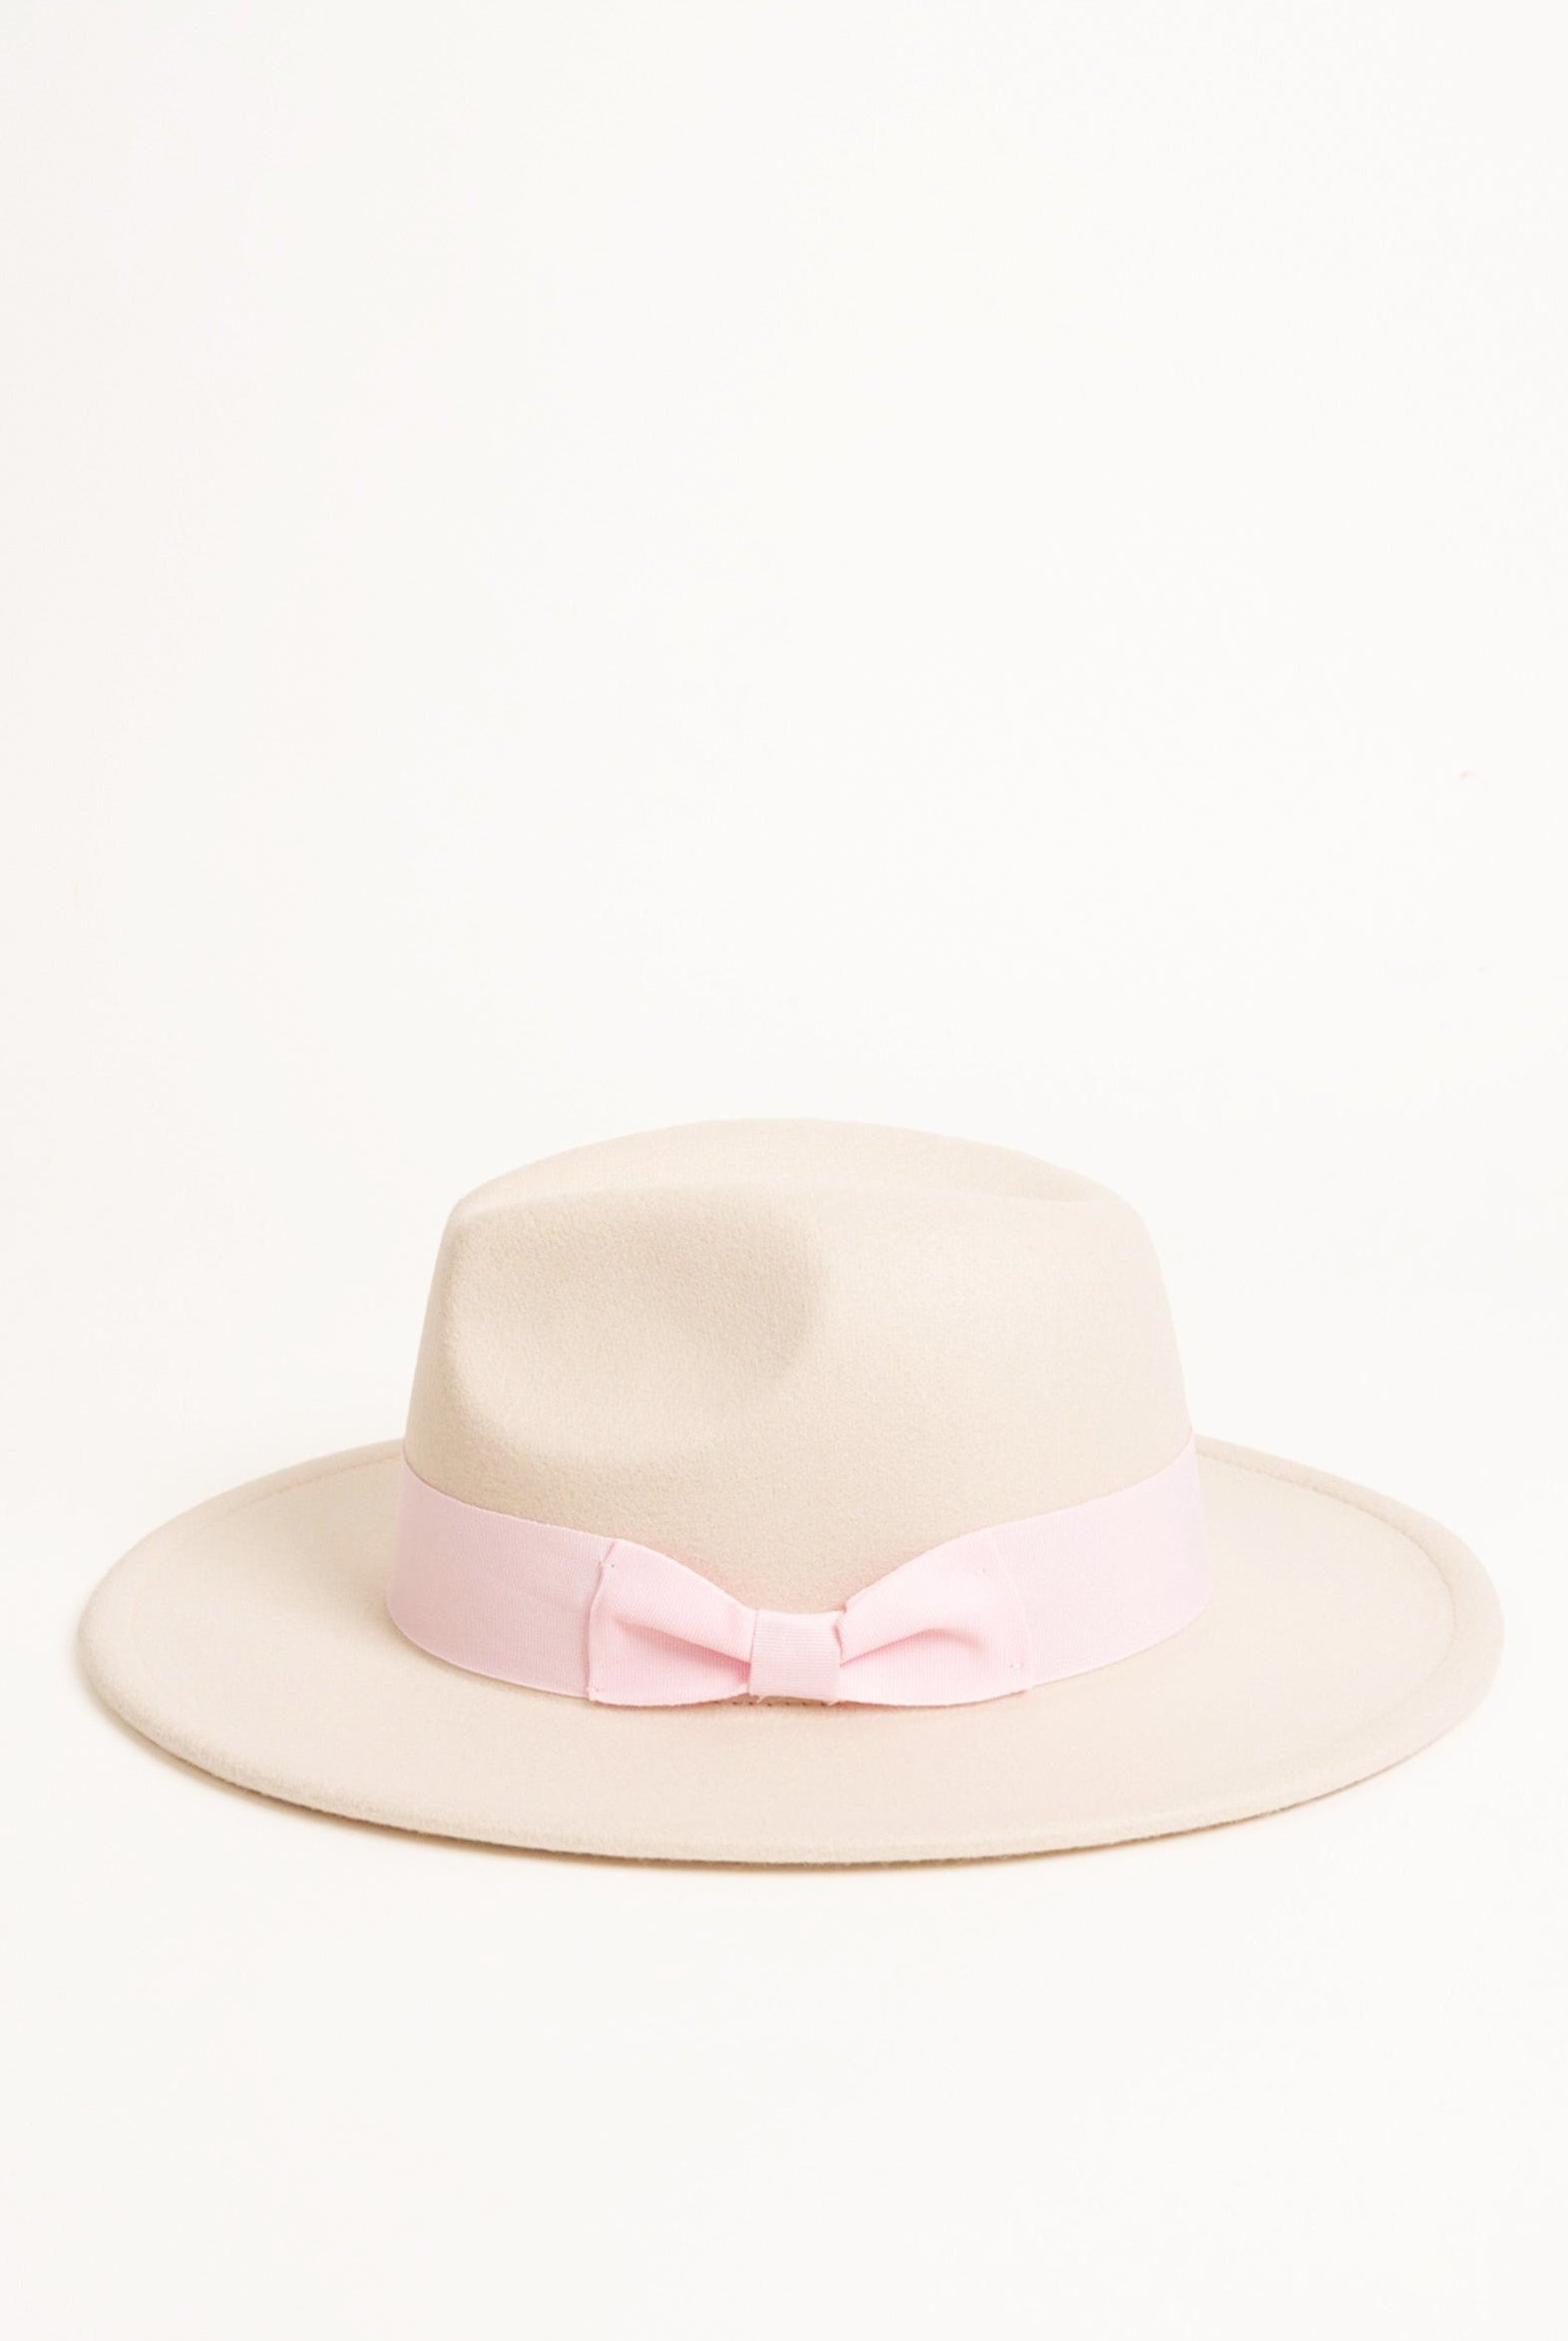 Fedora Hat in Beige with Pink Bow Trim and size adjuster | wedding guest | wedding | Party | Winter | Autumn | Walks | Festival | Holiday | Lolita | Coquette | Women's | Accessories | Hat | Accessory